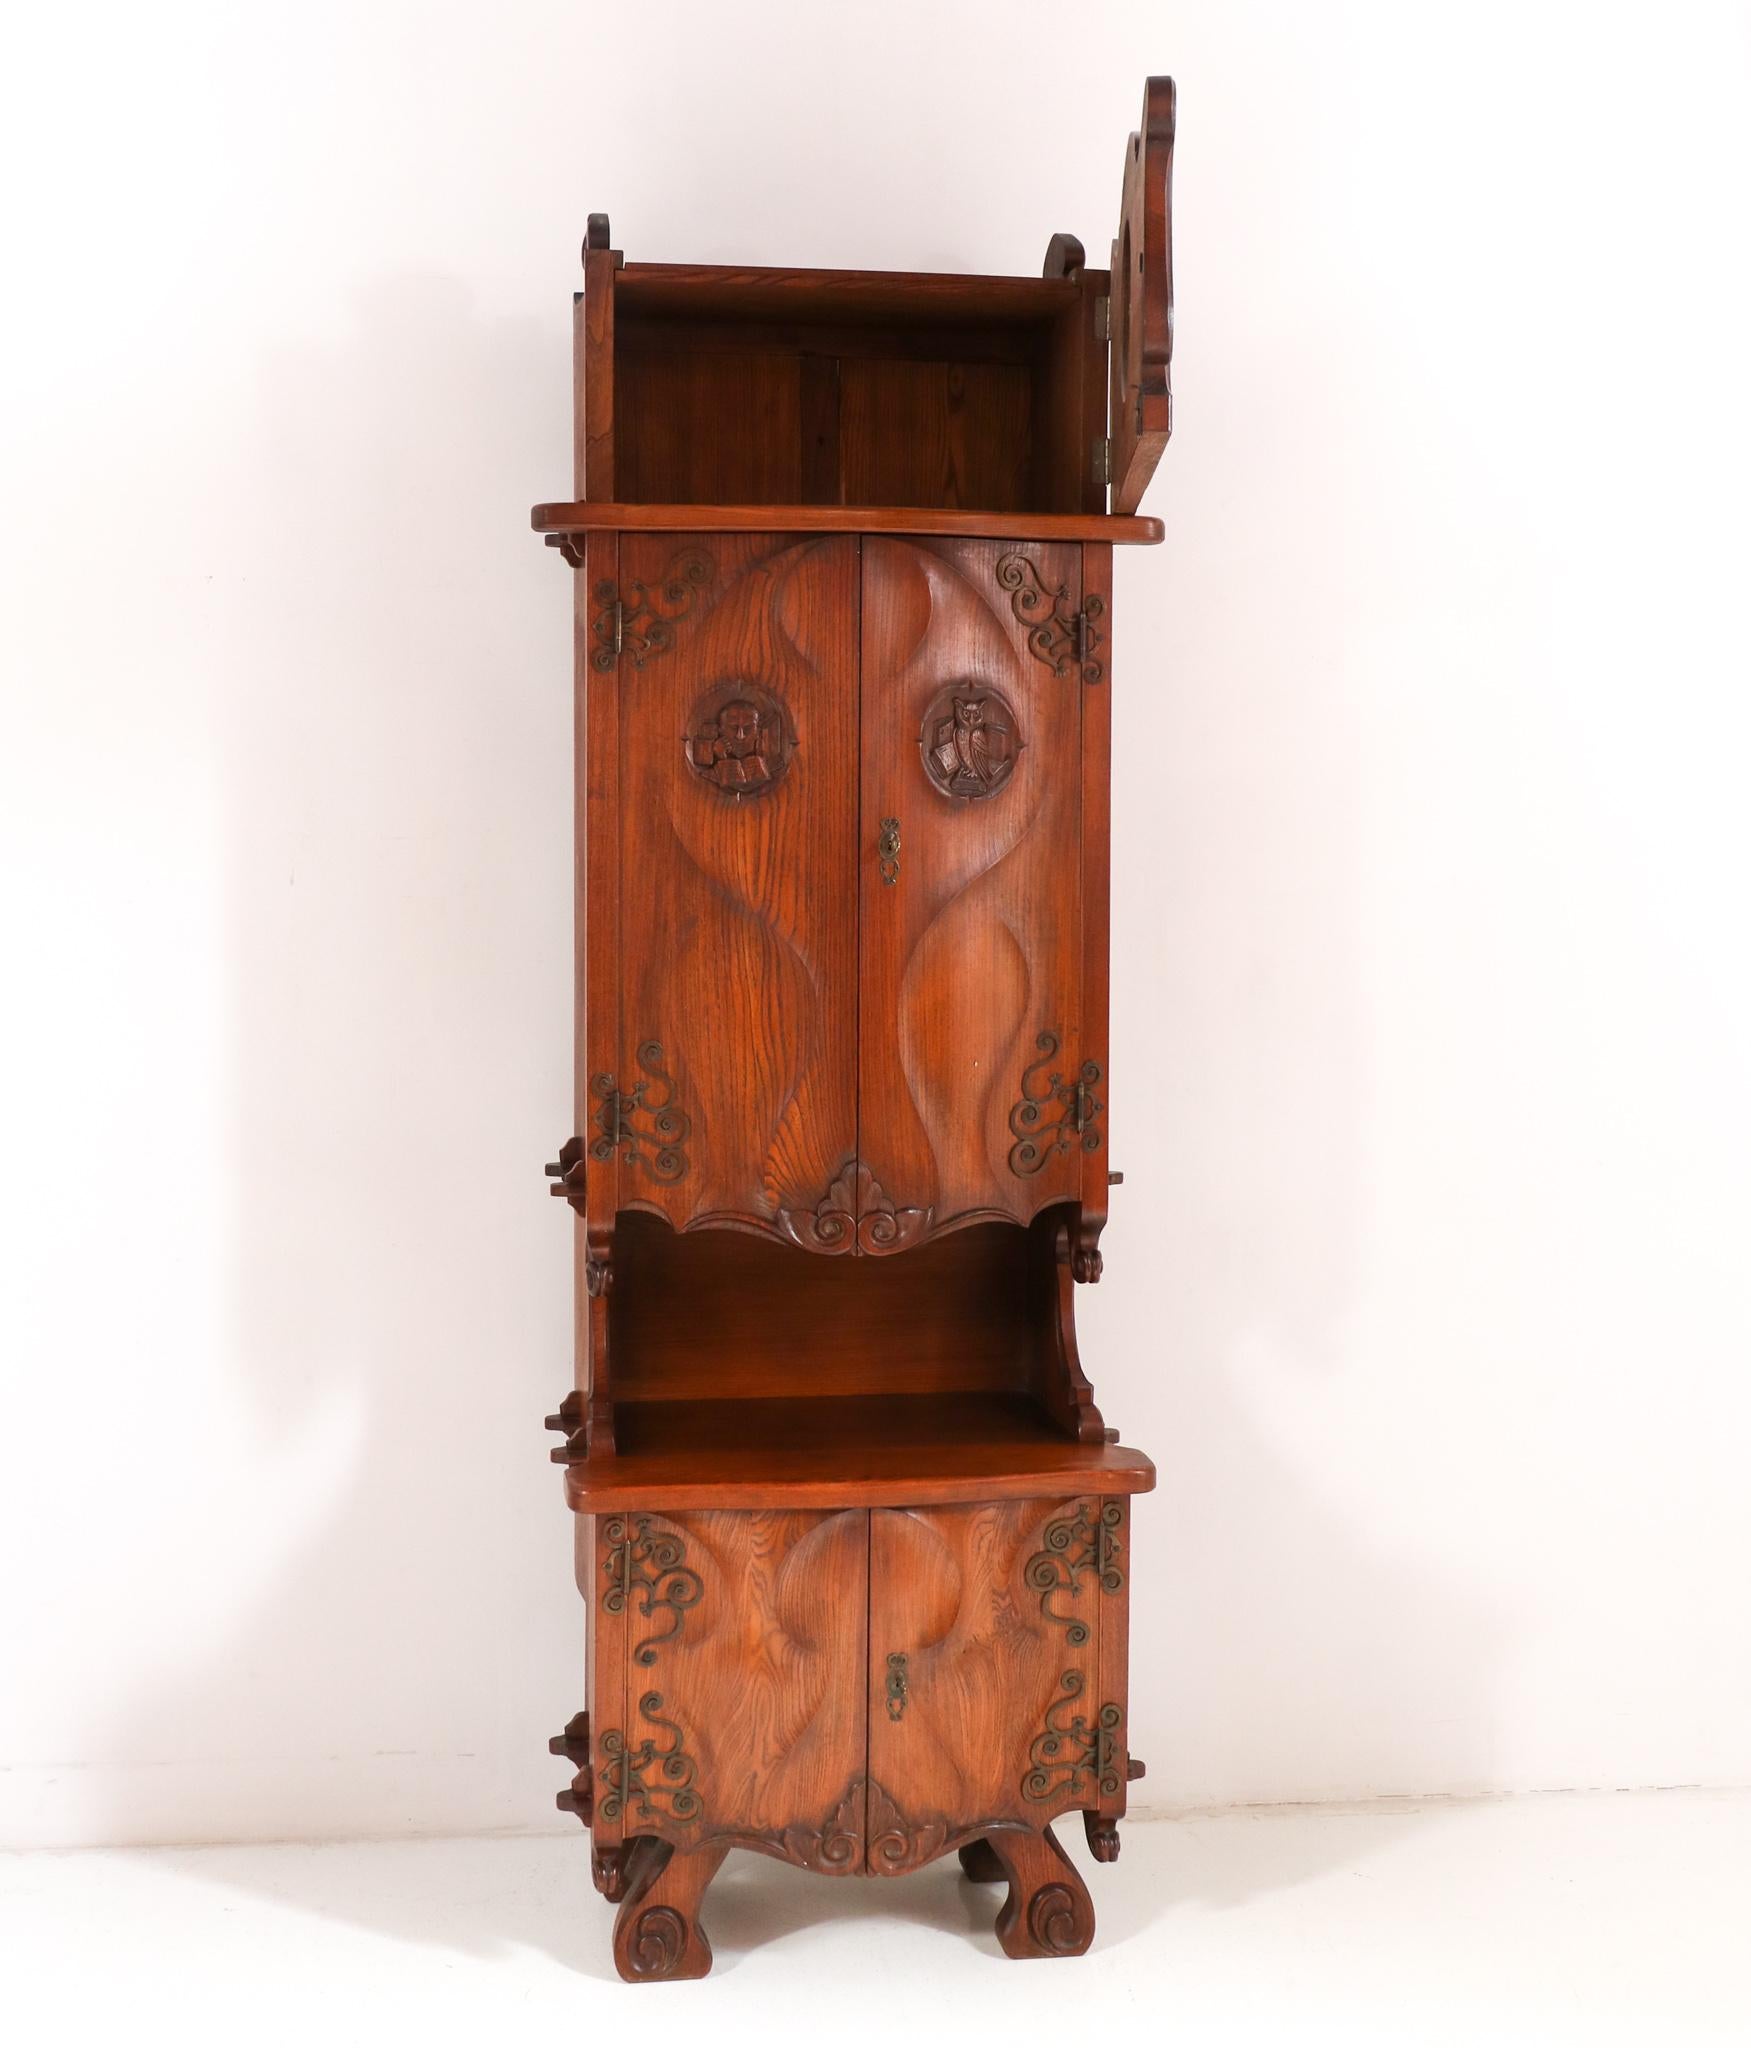 Ash Gothic Revival Cupboard with Integrated Clock, 1950s For Sale 1